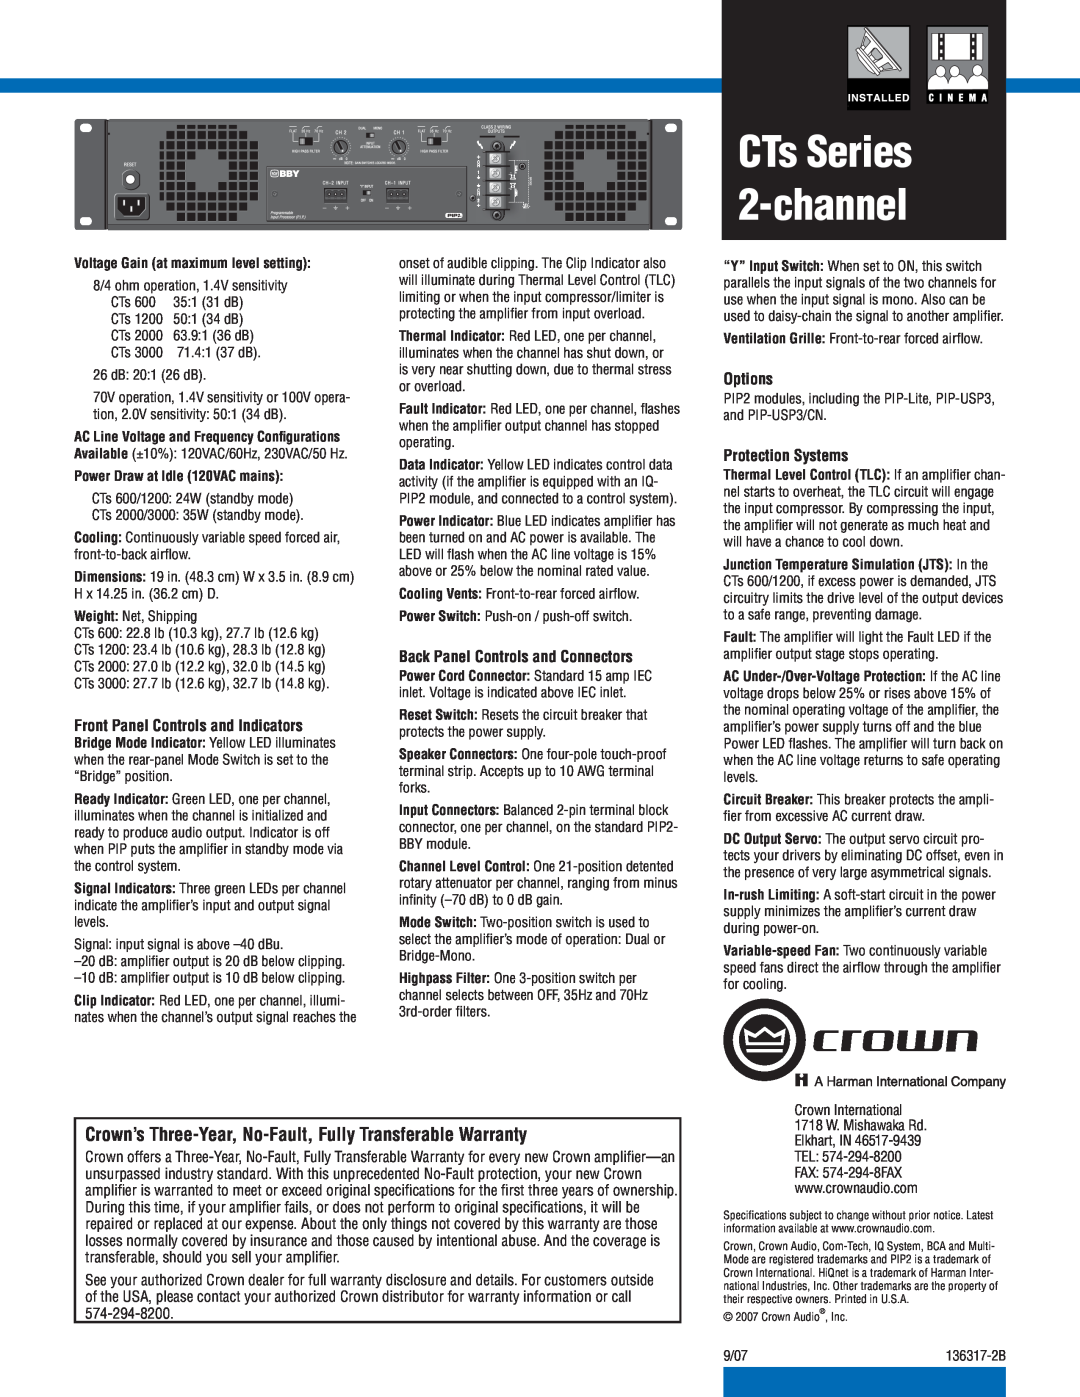 Crown Audio CTs 2-Channel specifications Front Panel Controls and Indicators, Back Panel Controls and Connectors, Options 